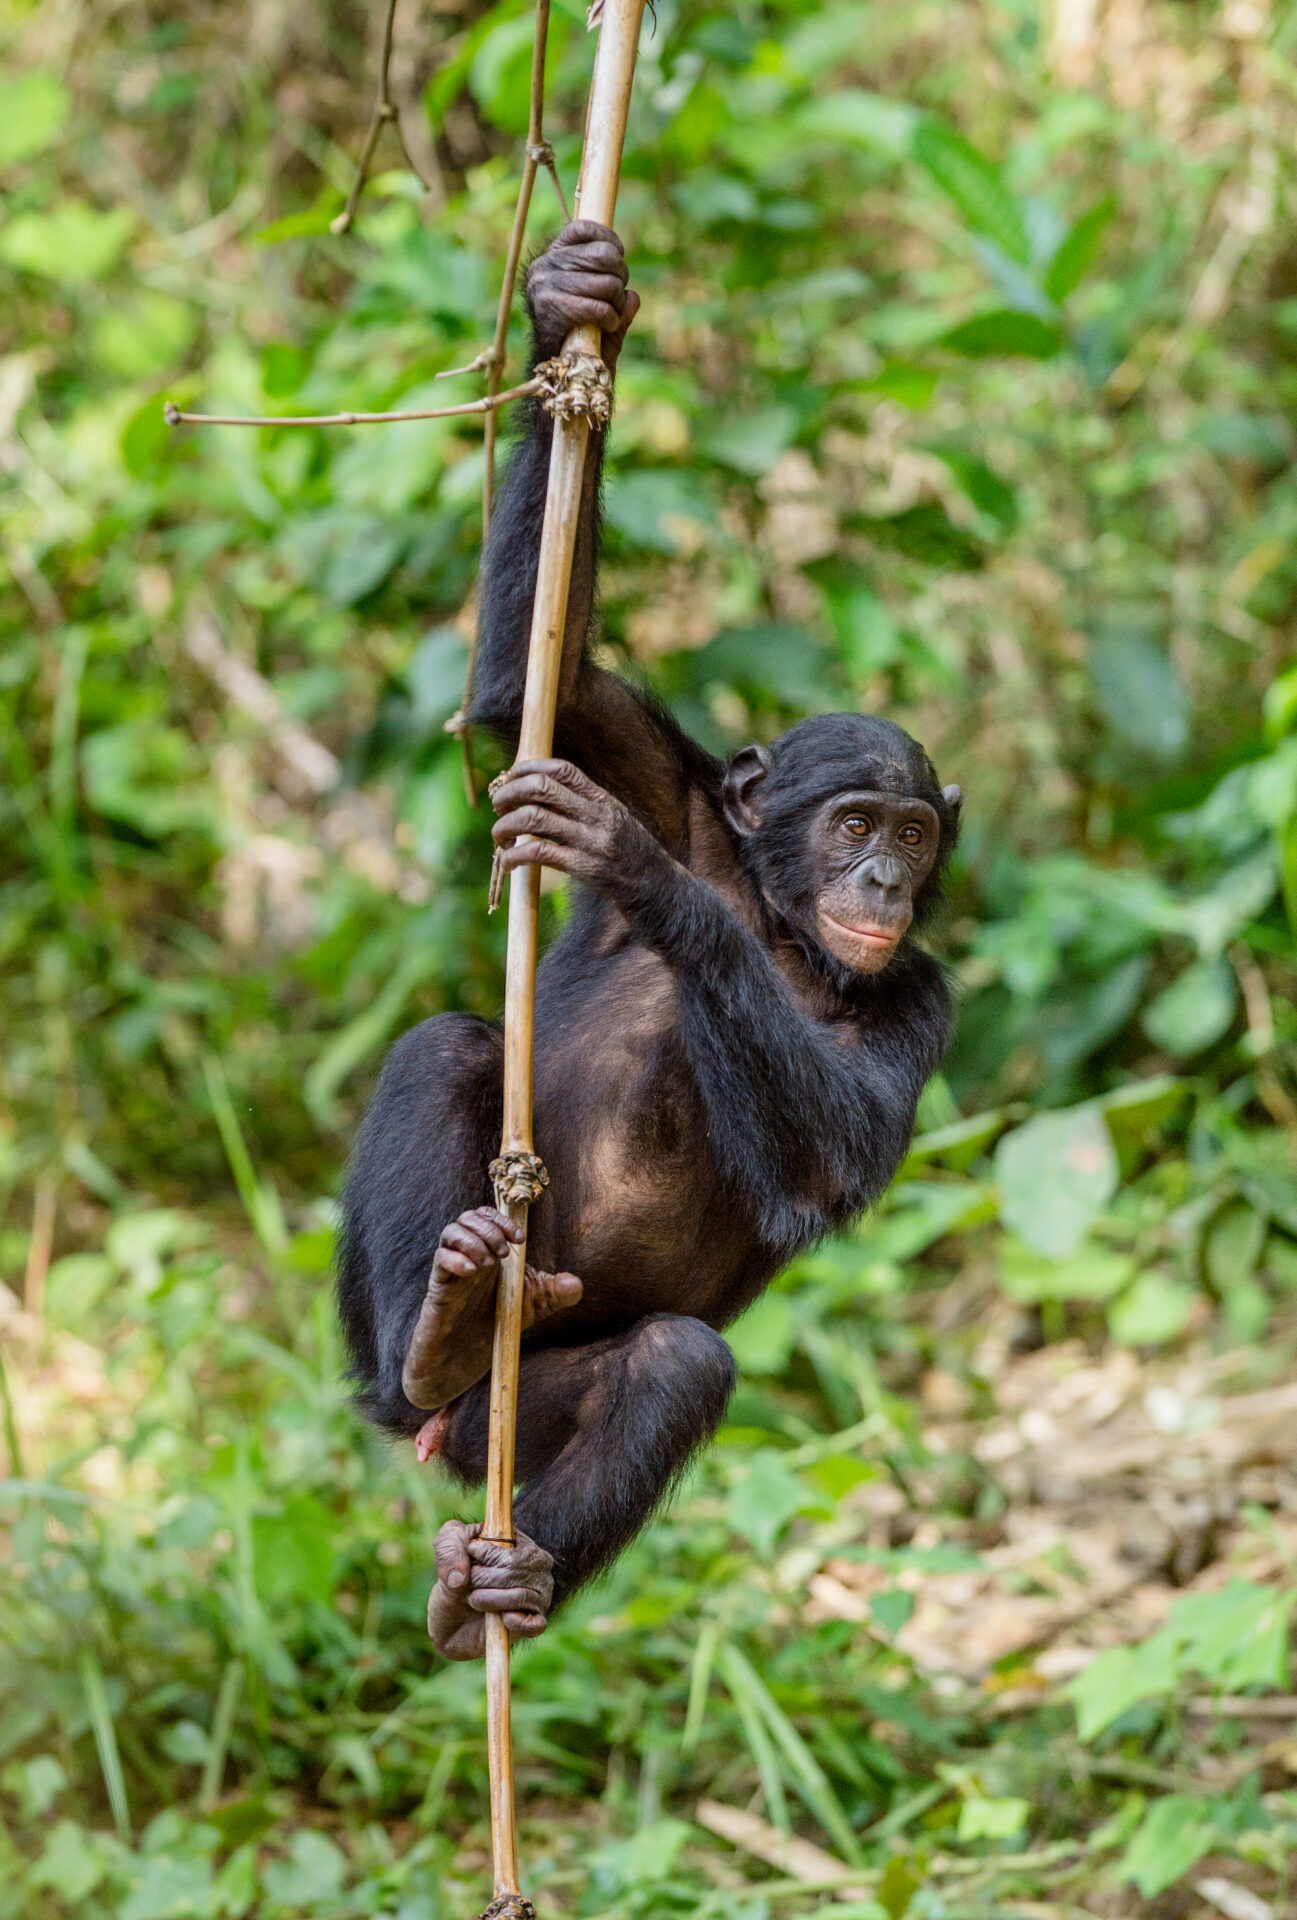 The Endangered Bonobos are returning to the region as a result of reduced poaching